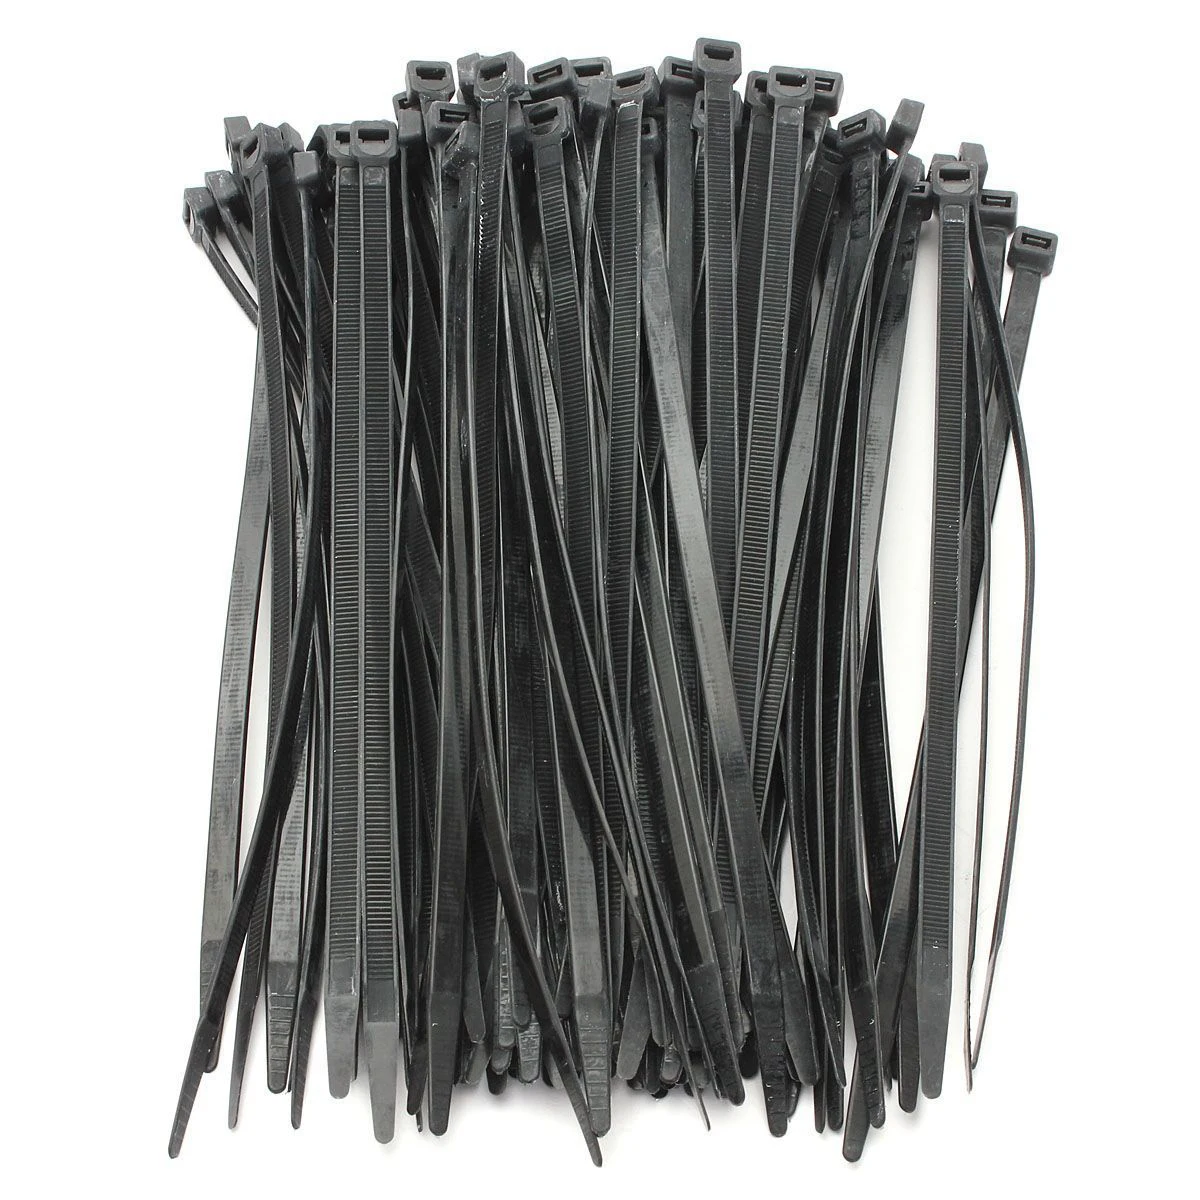 Cable Ties Nylon Plastic Zip Tie Wraps Strong Long All Sizes White/Black 